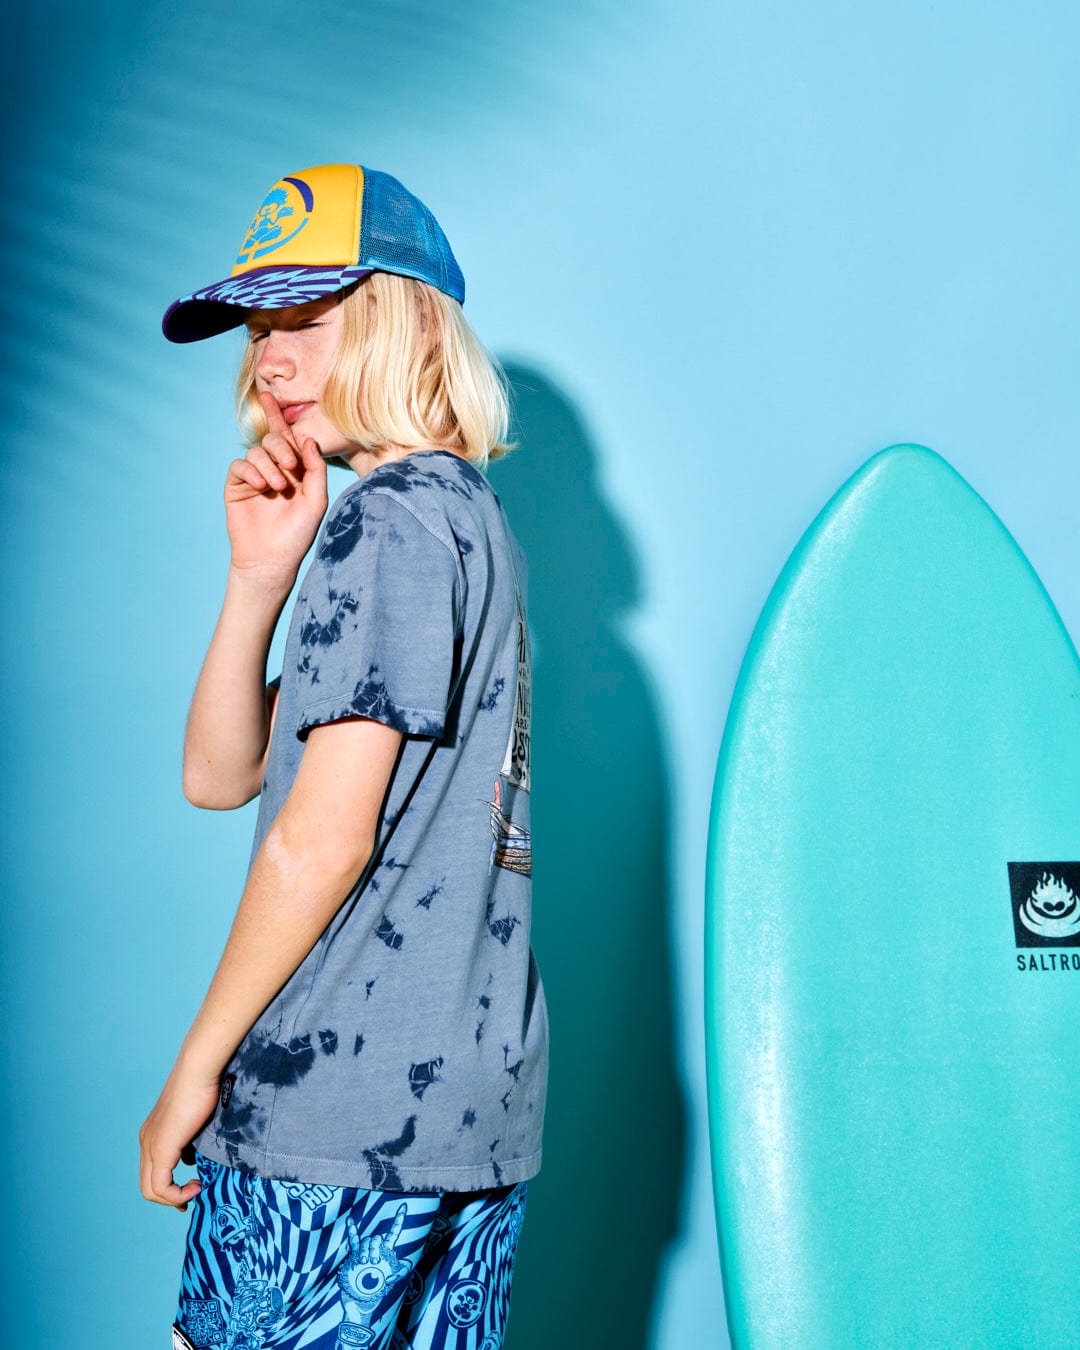 A person wearing a cap and casual beachwear stands next to a light blue surfboard with a hint of blue tie dye against a solid blue background, showcasing the Saltrock Lost Ships - Kids Short Sleeve T-Shirt - Blue Tie Dye.